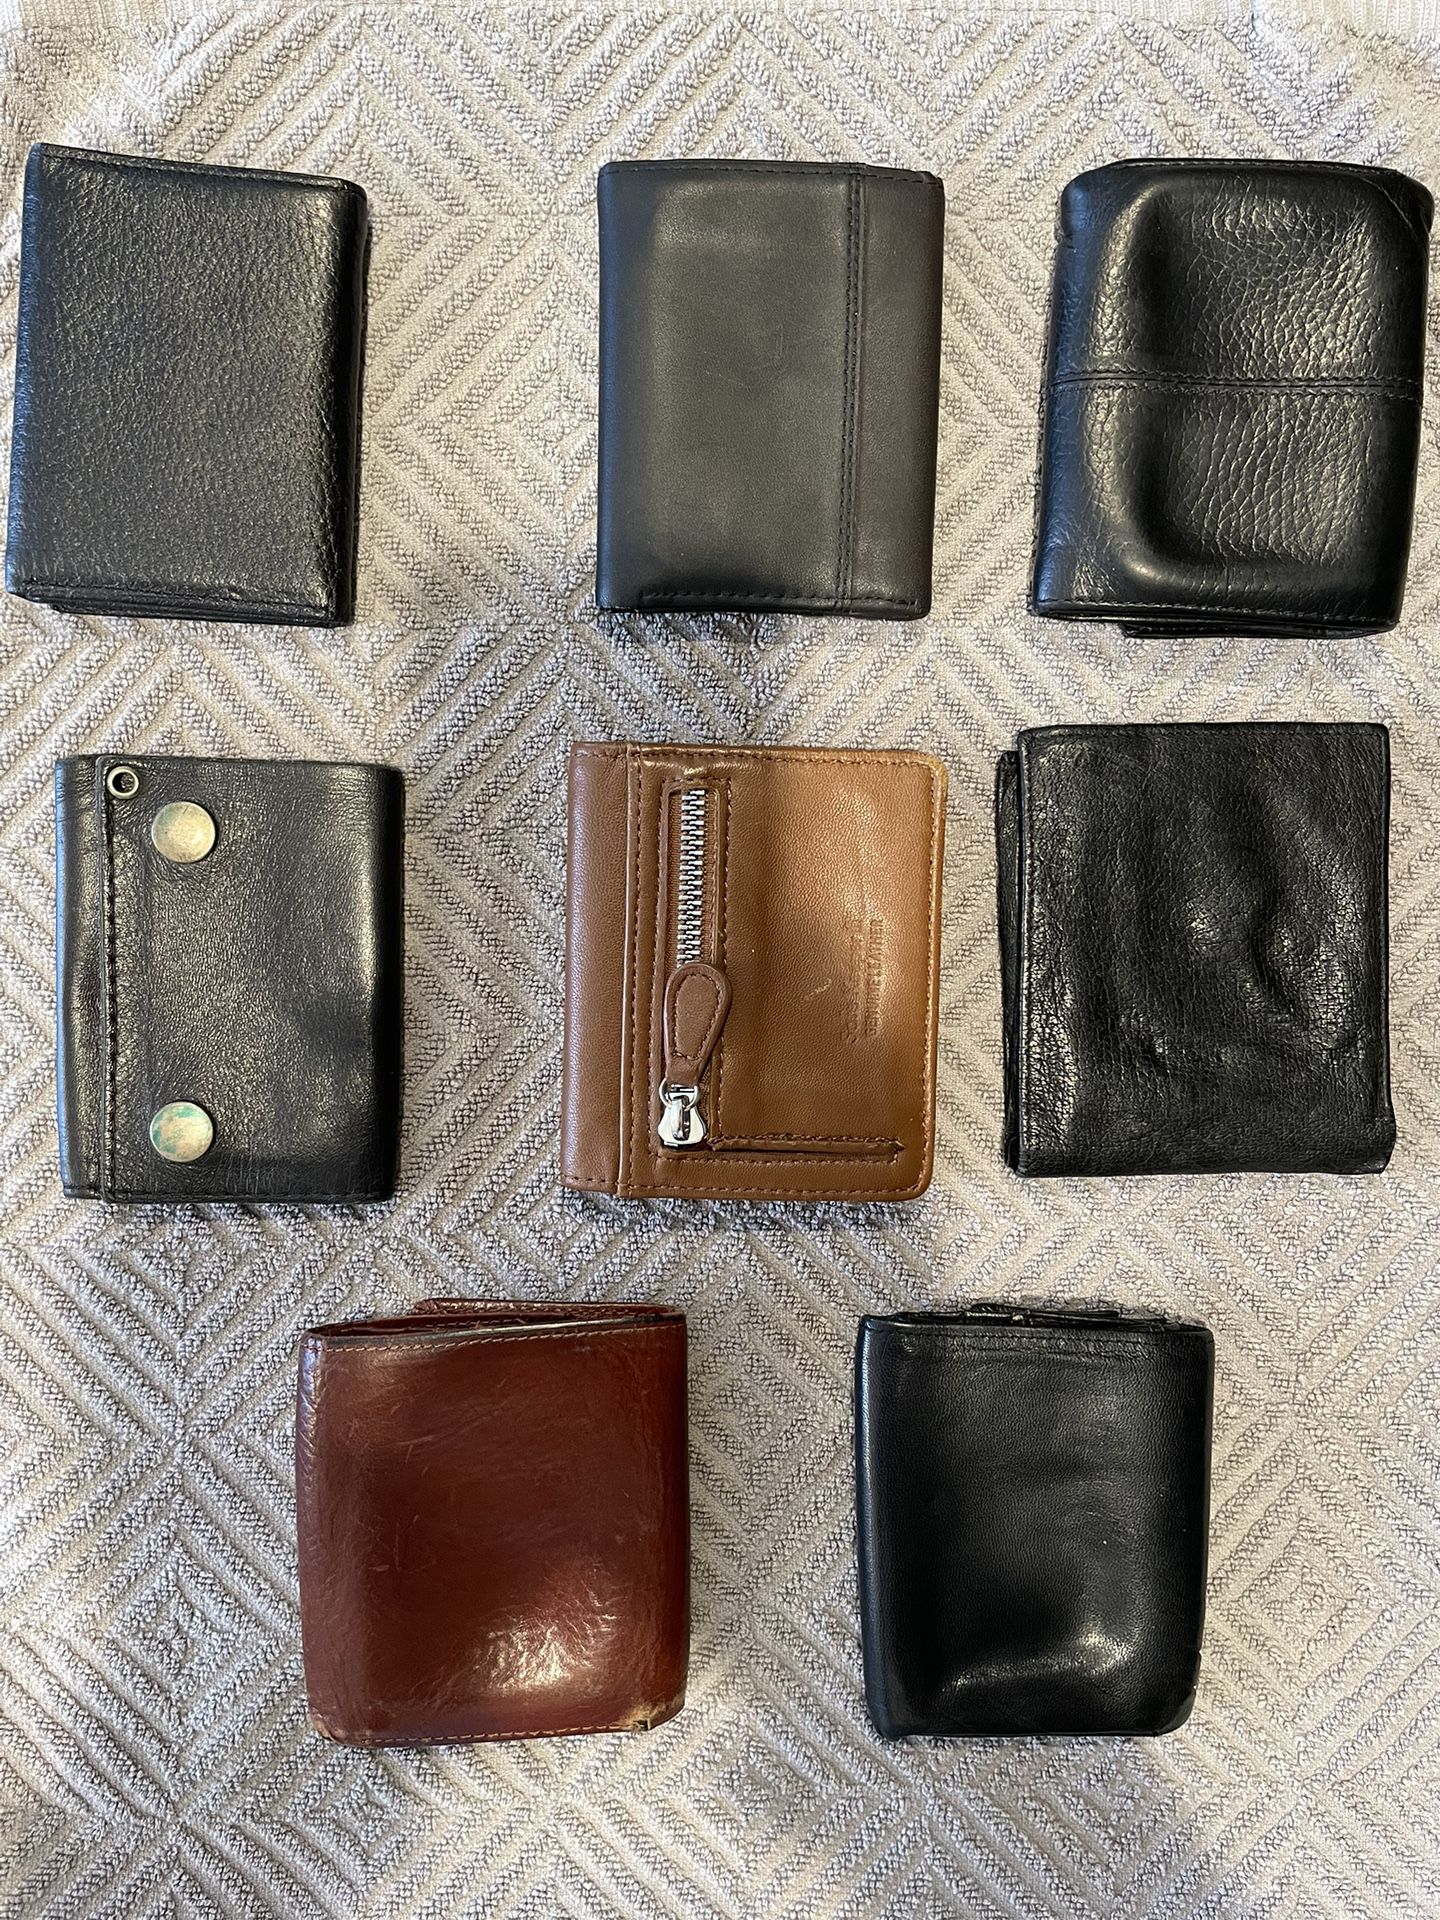 Wallets -All For $8